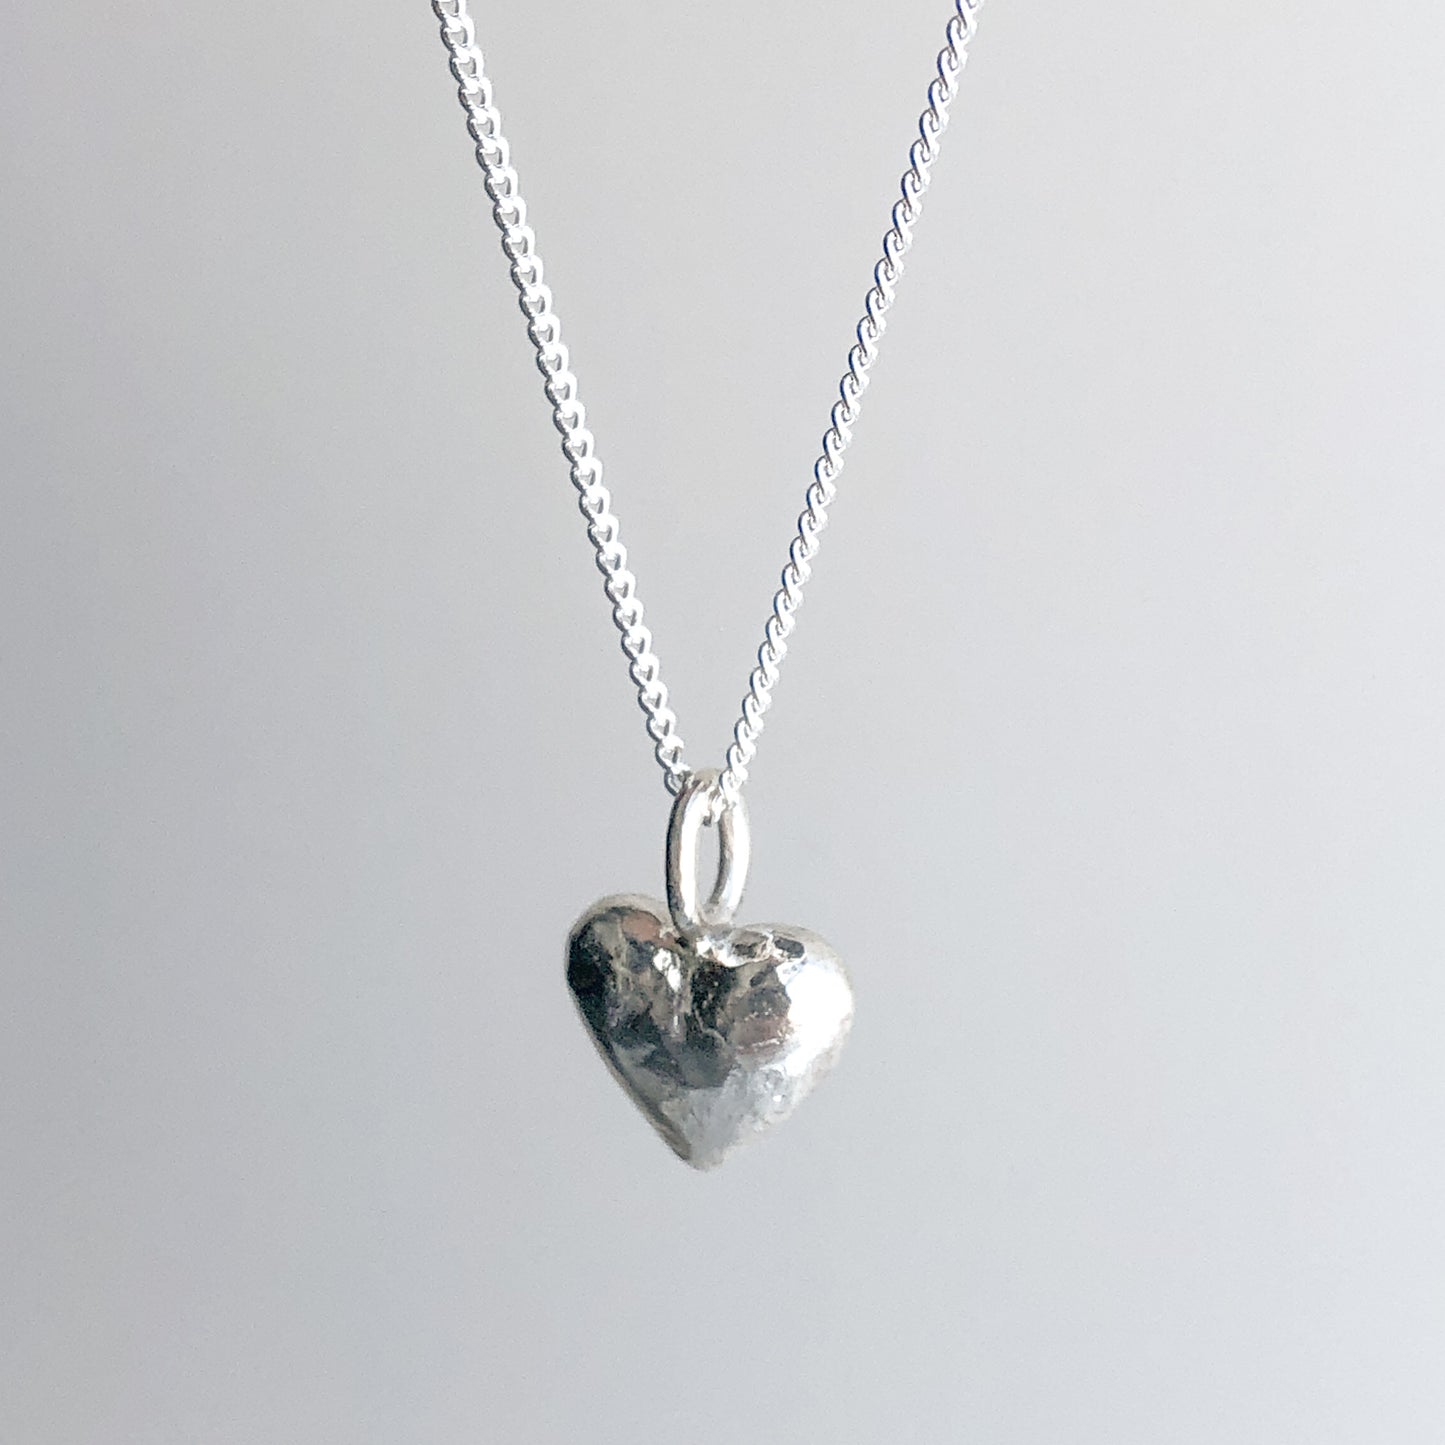 Carved Rustic Silver Heart Pendant